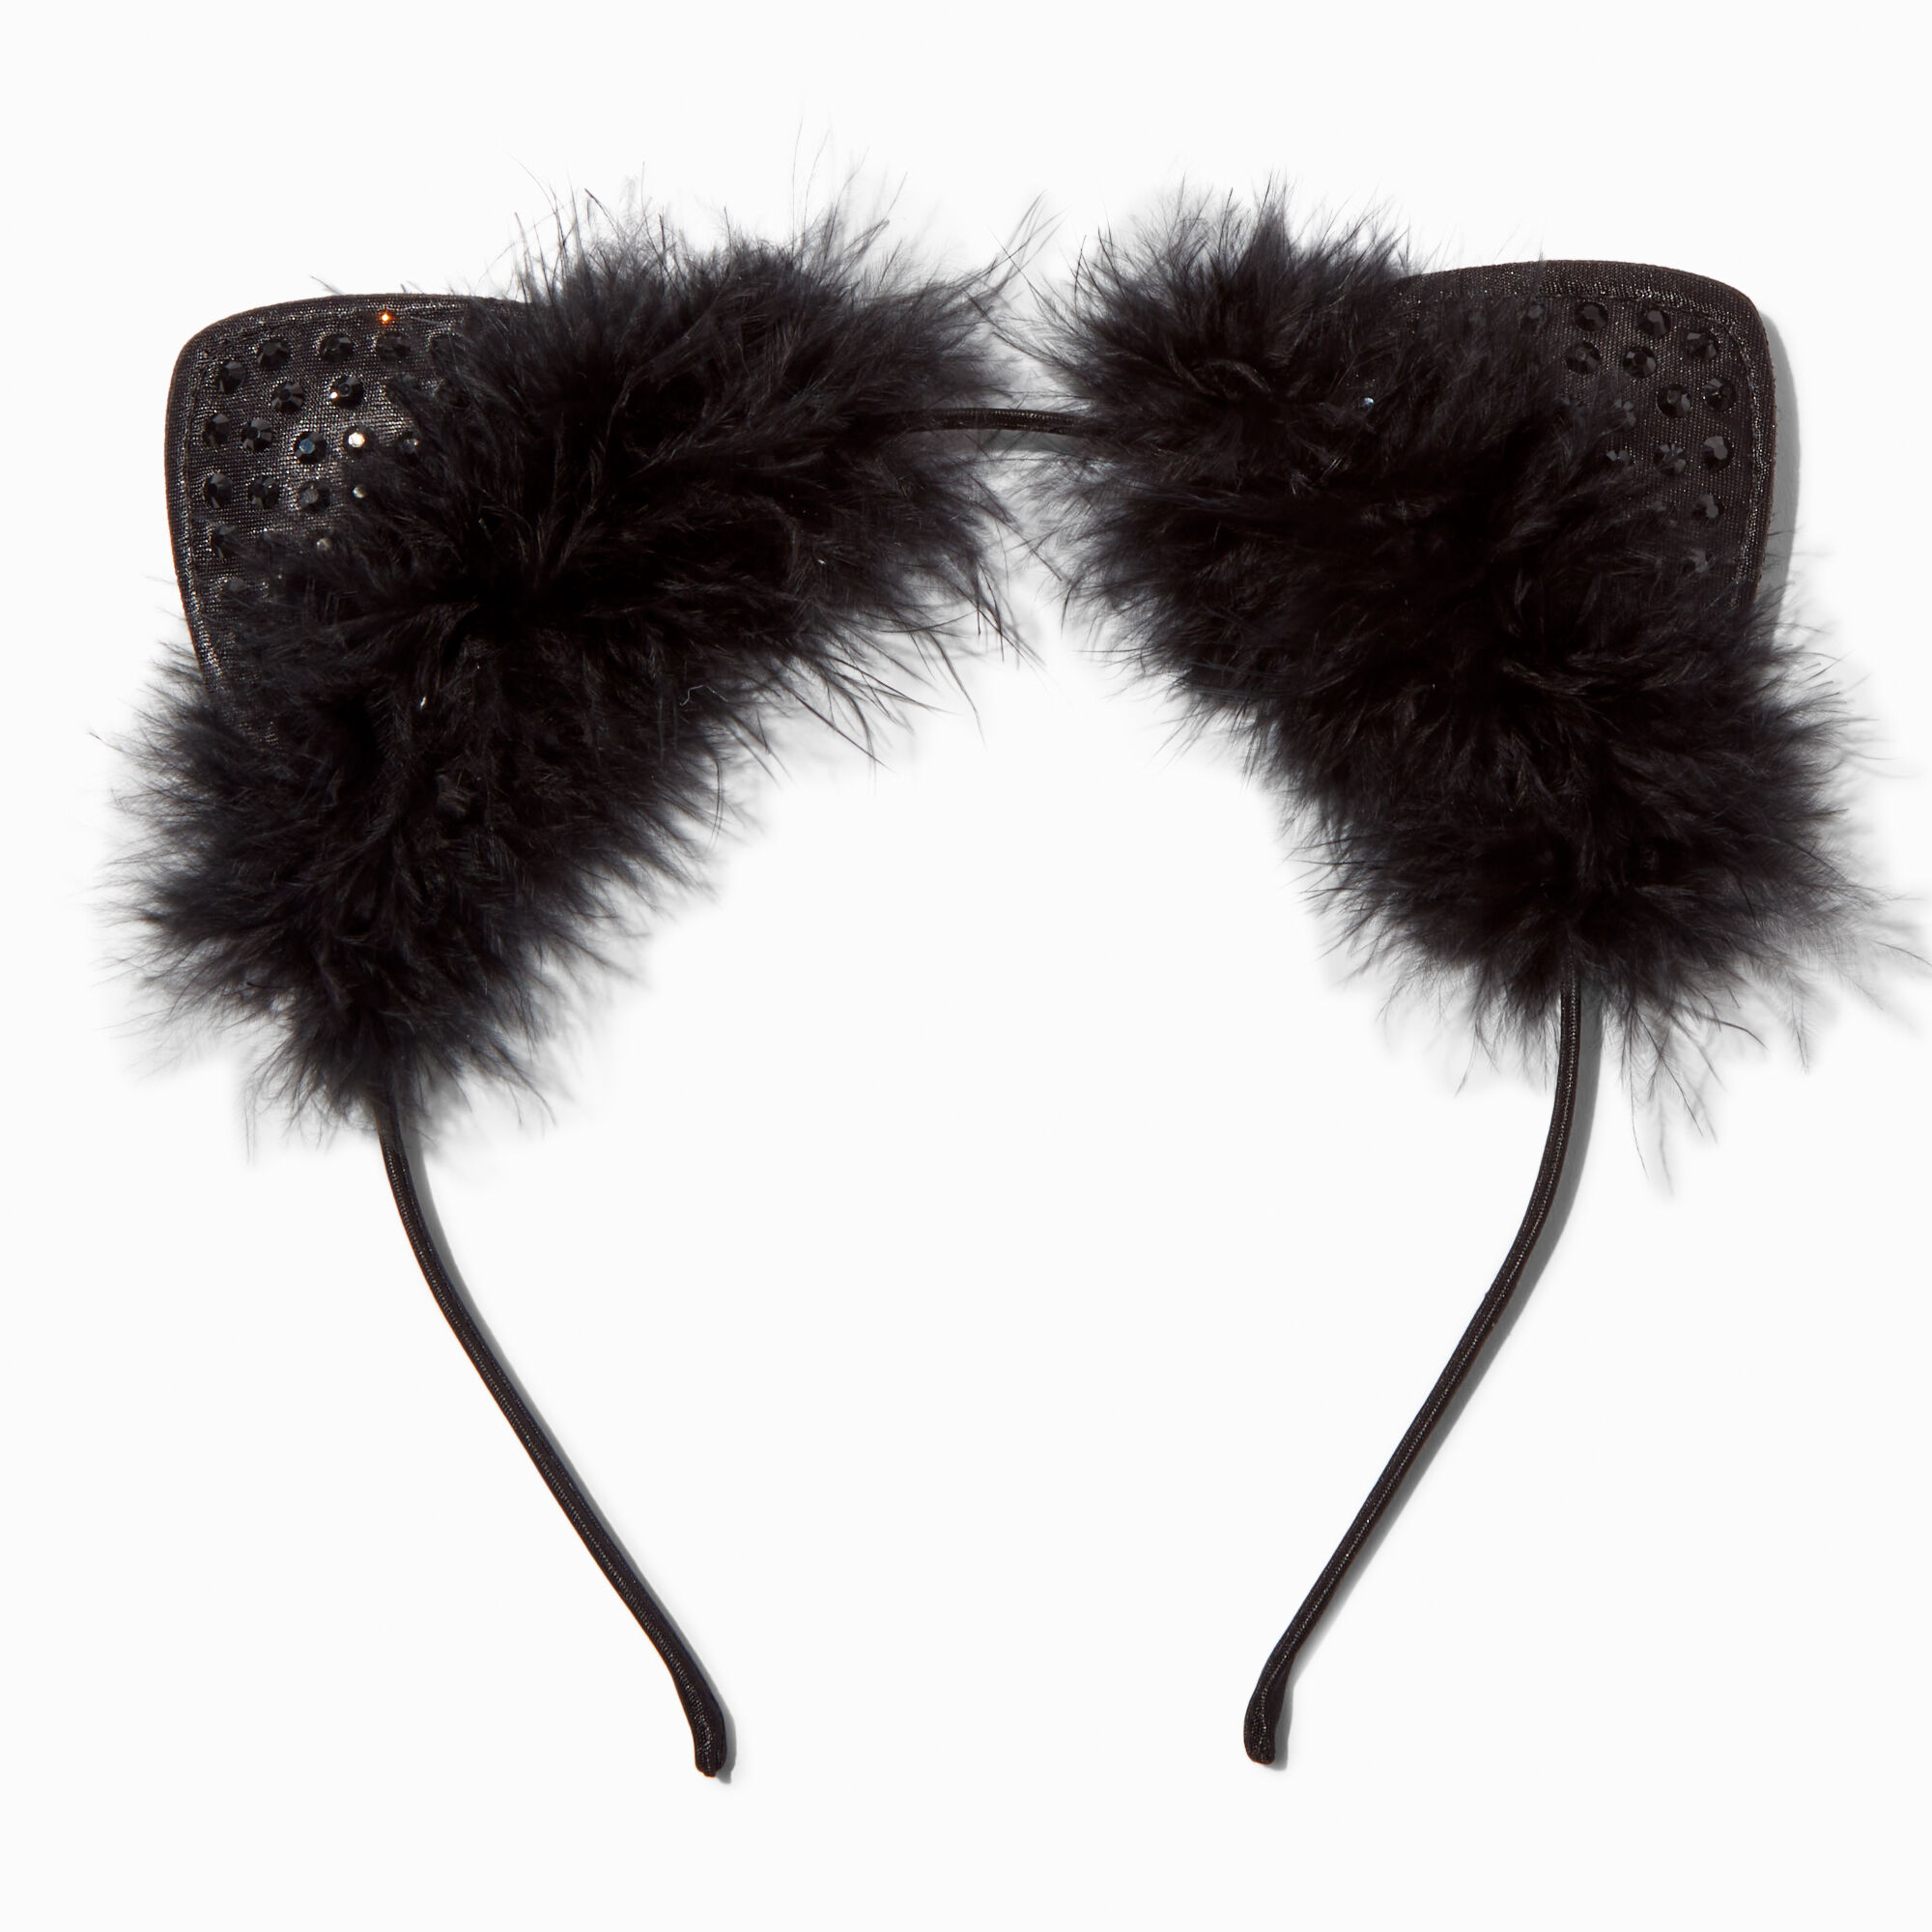 View Claires Feather Cat Ears Headband Black information